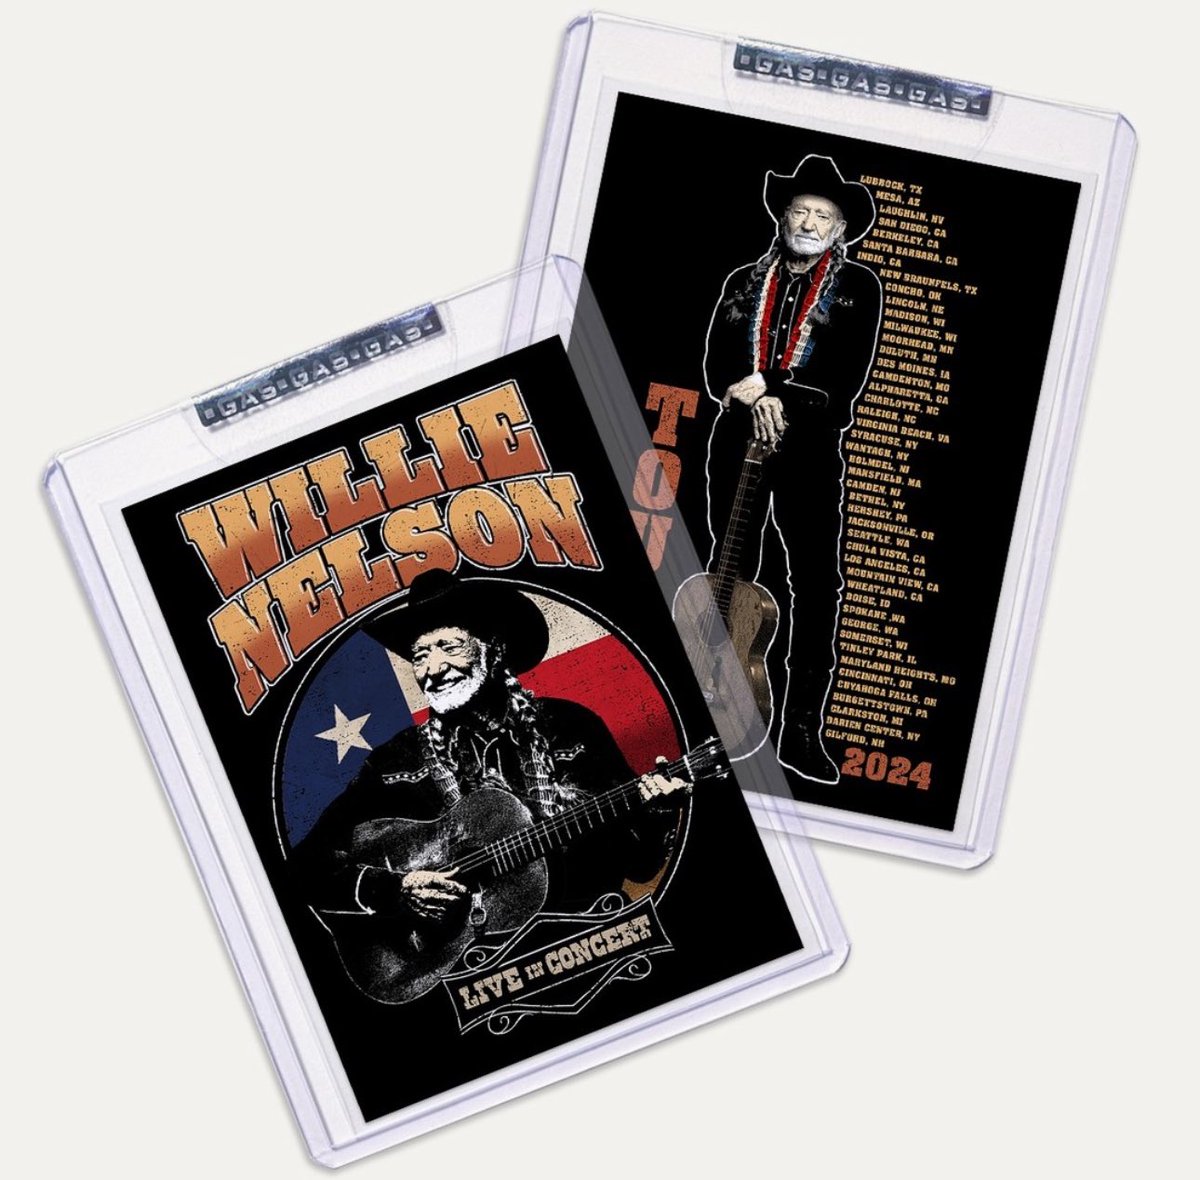 GAS is proud to present the official @WillieNelson 2024 Tour Trading Card, available exclusively in-person at each show while supplies last! It's a limited edition numbered to 250 card, so act fast! #willienelson #countrymusic #gastradingcards #tradingcards